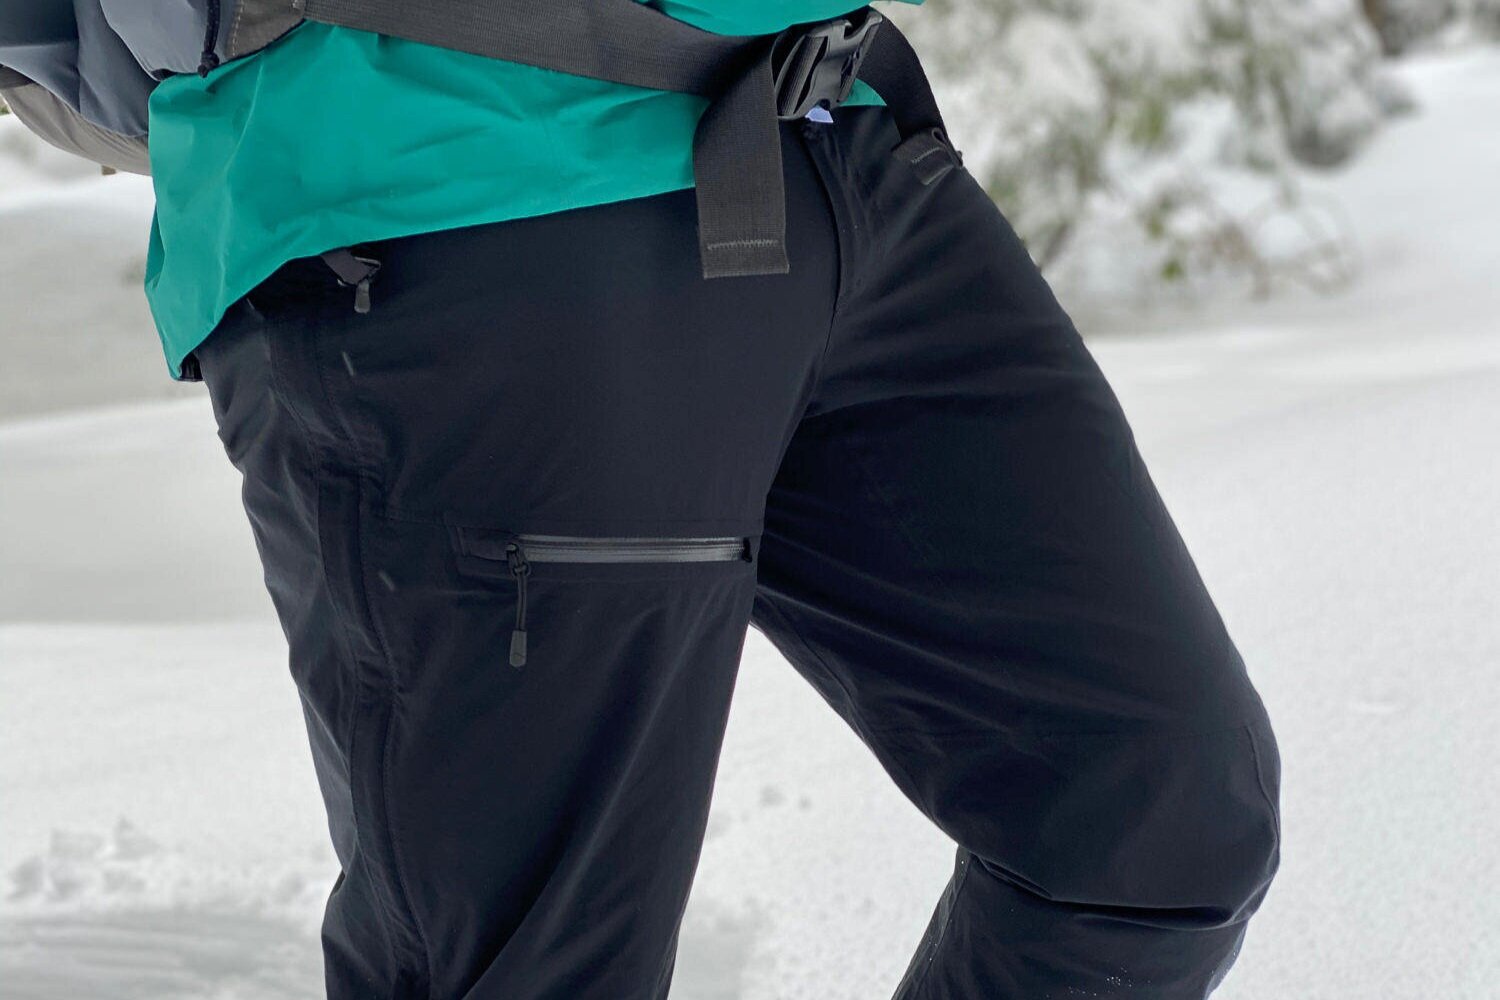 The comfy Mountain Hardwear Stretch Ozonic Pants are durable which makes them perfect for snowshoe hikes.